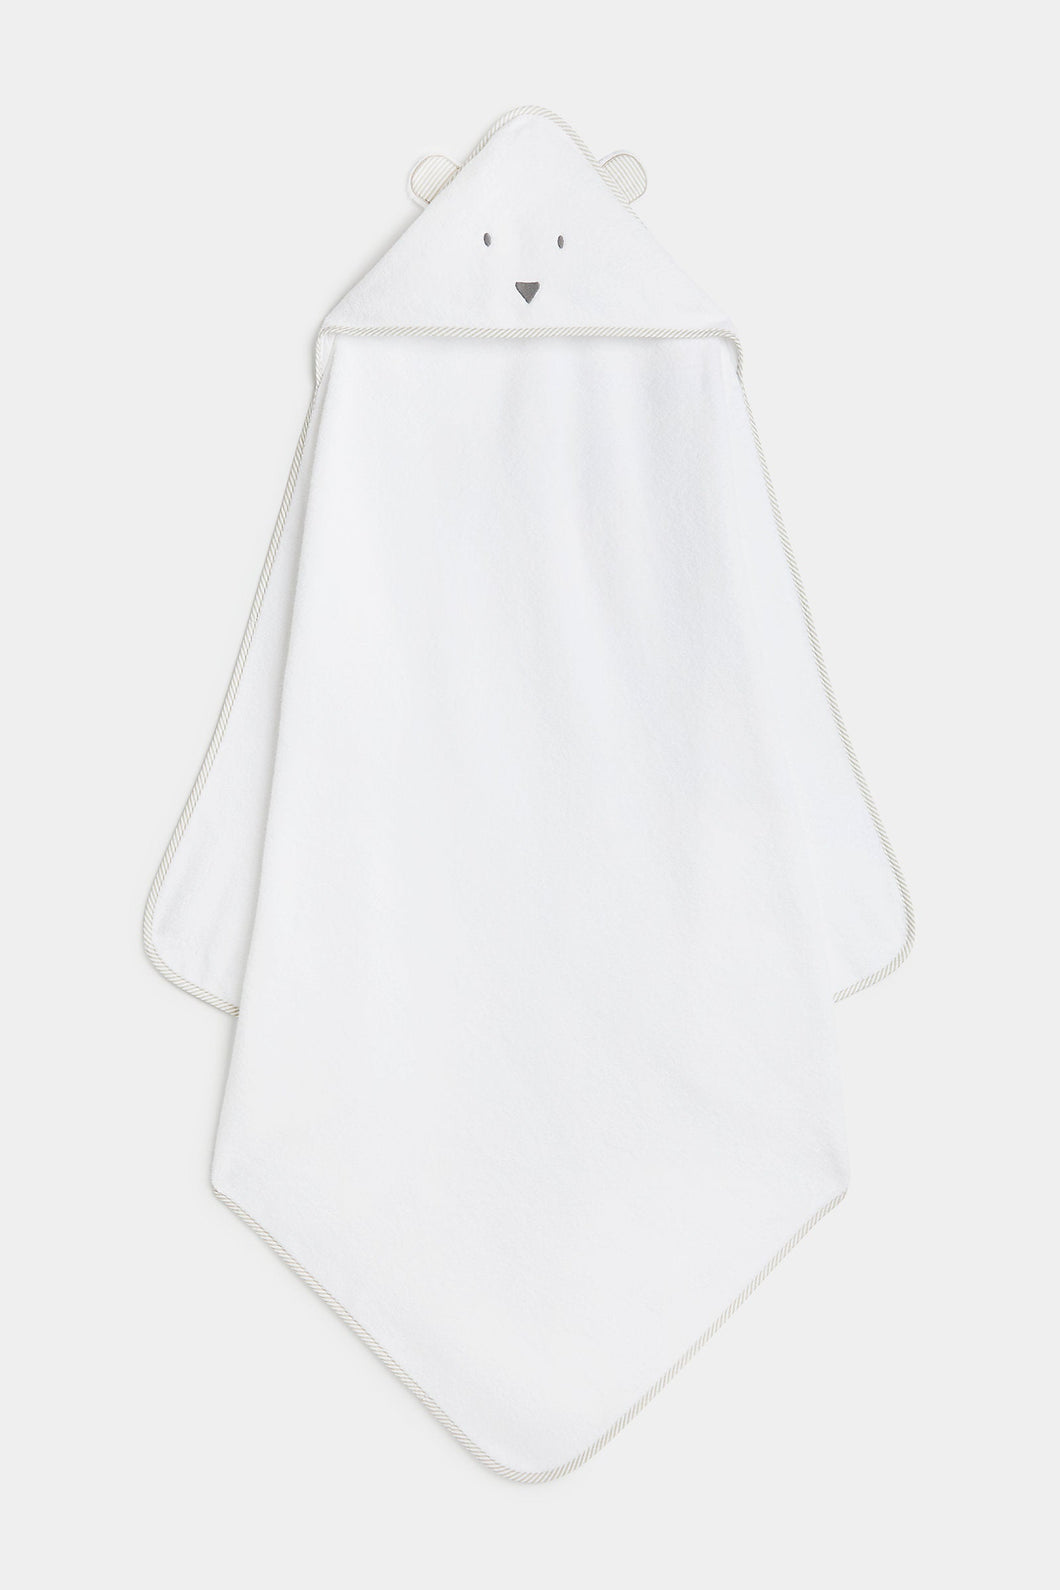 FREE GIFT - Mothercare Premium Cuddle And Dry Hooded Towel - White (Worth $180